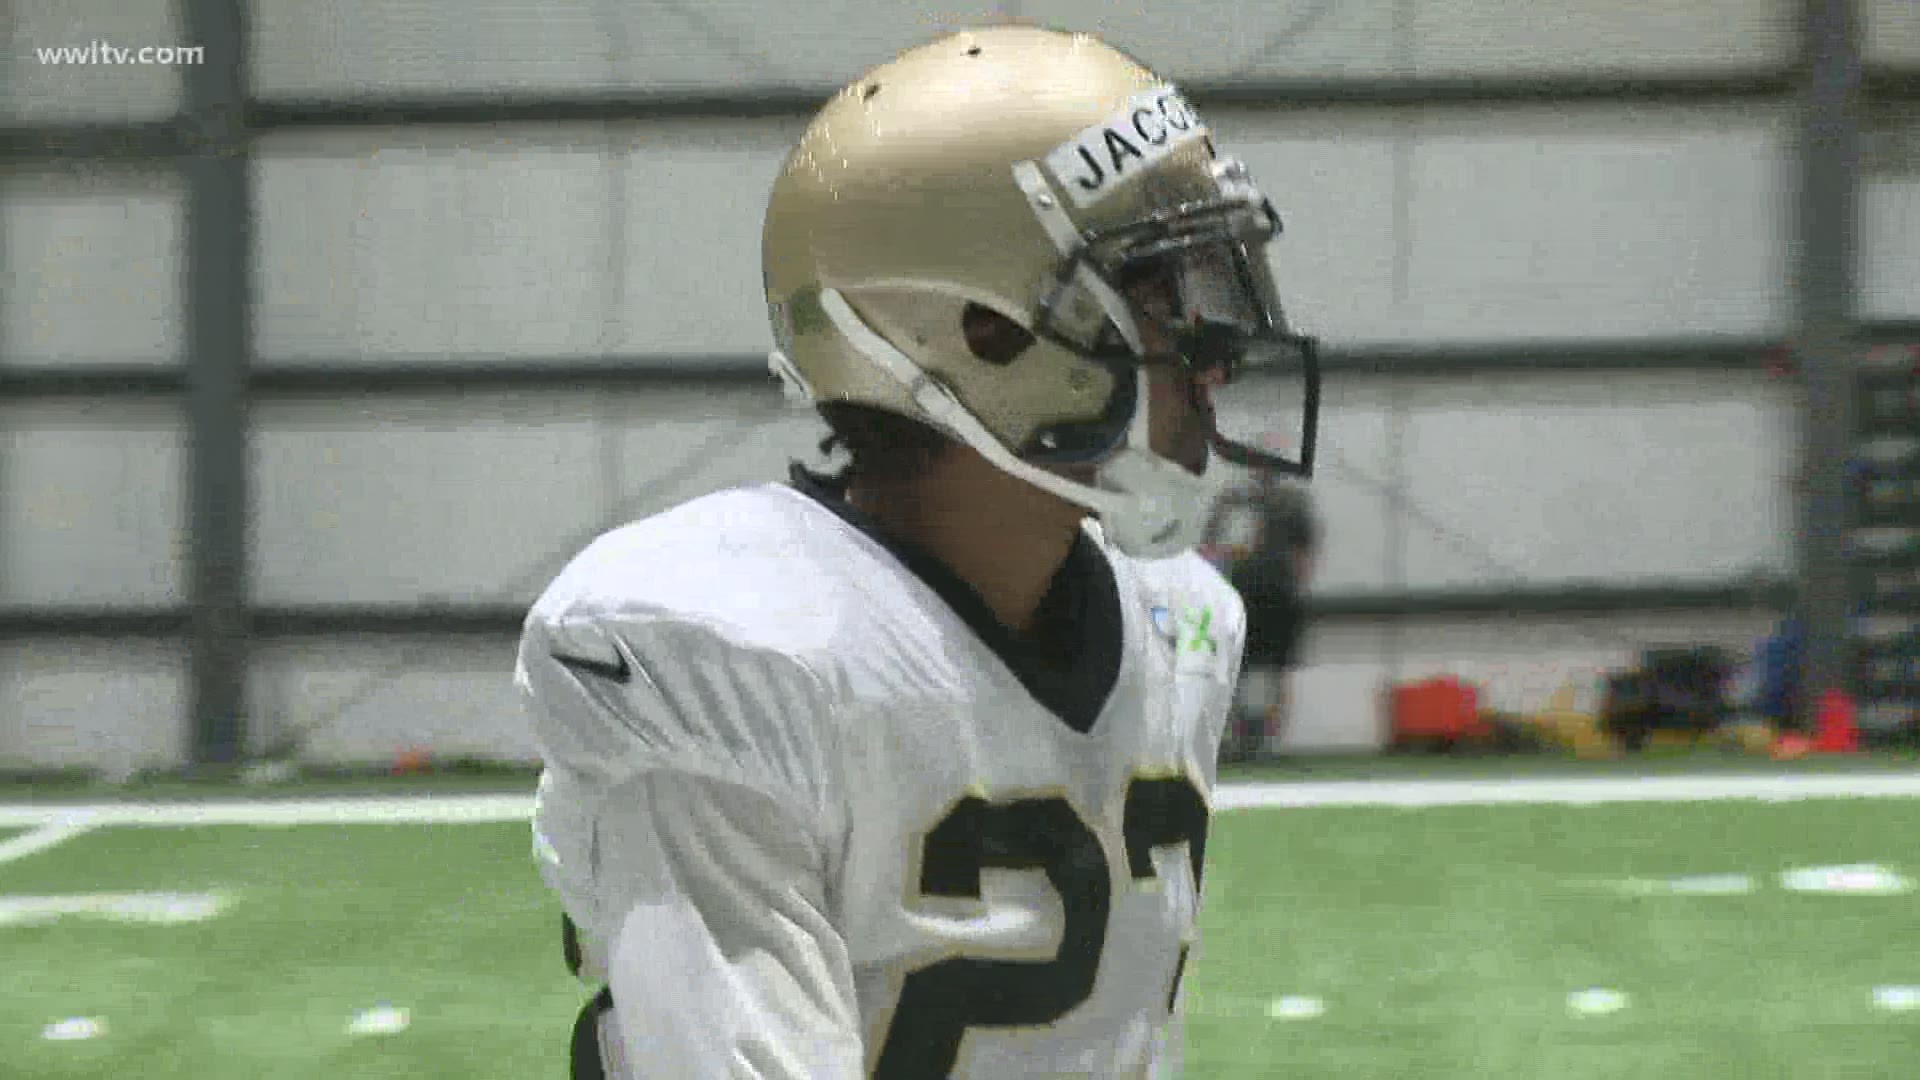 Saints players are protesting Jacob Blake's death by wearing his name on their helmets at practice.